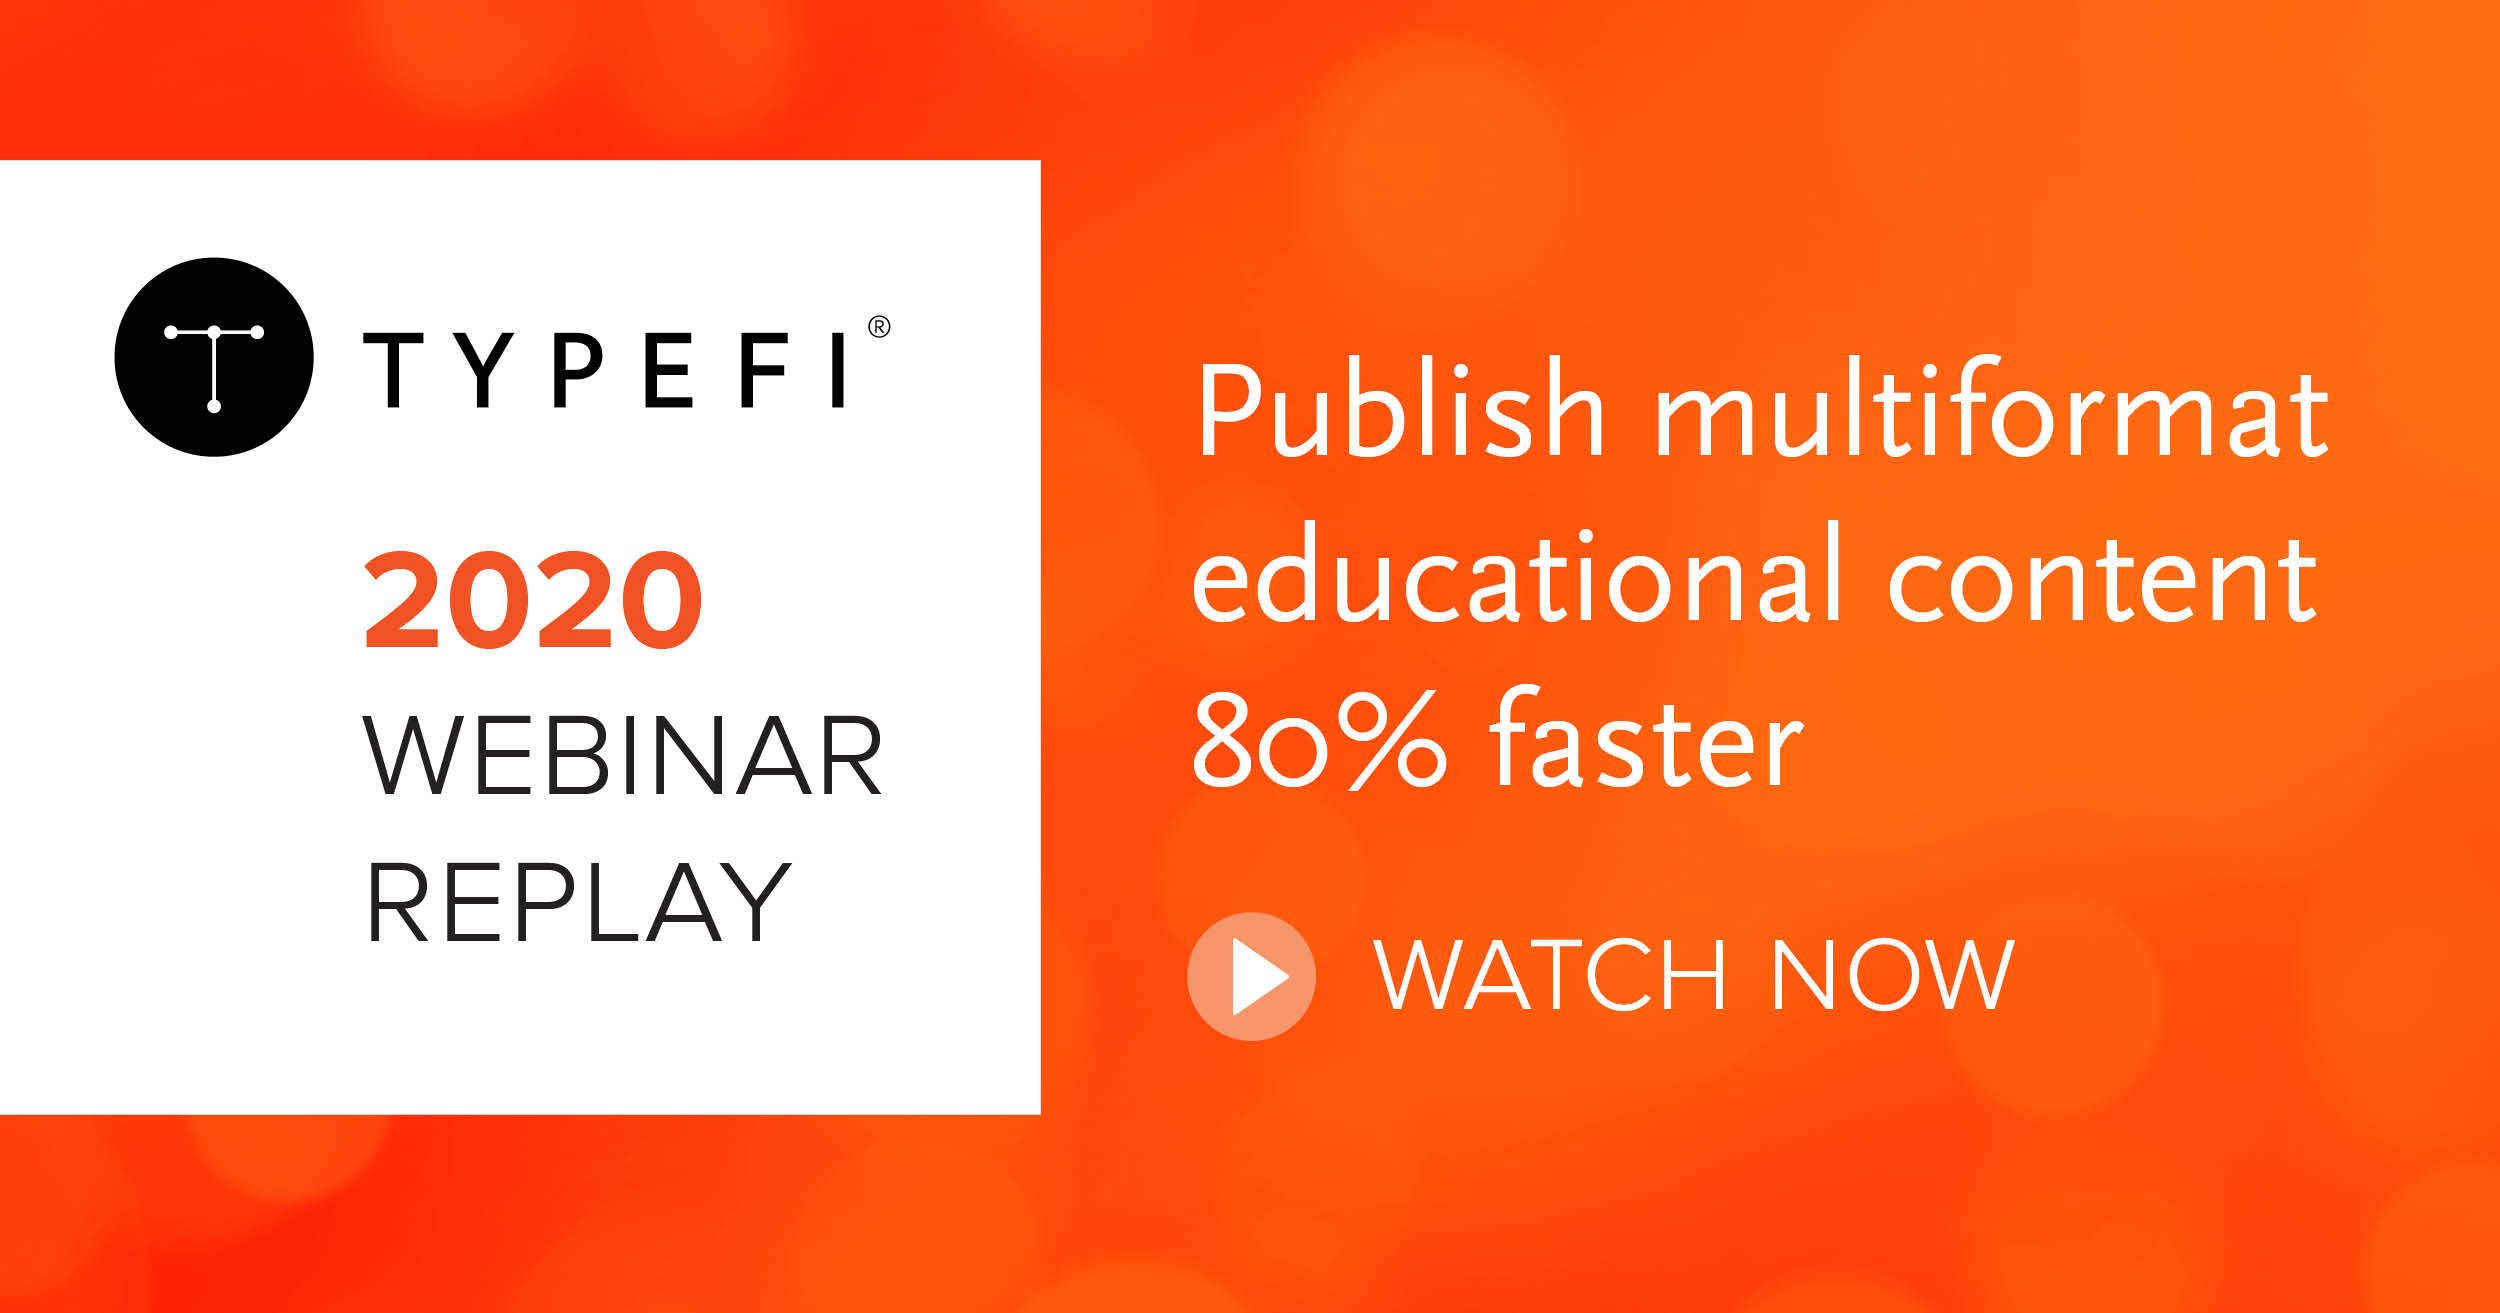 A promotional graphic for the webinar 'Publish multiformat educational content 80% faster'